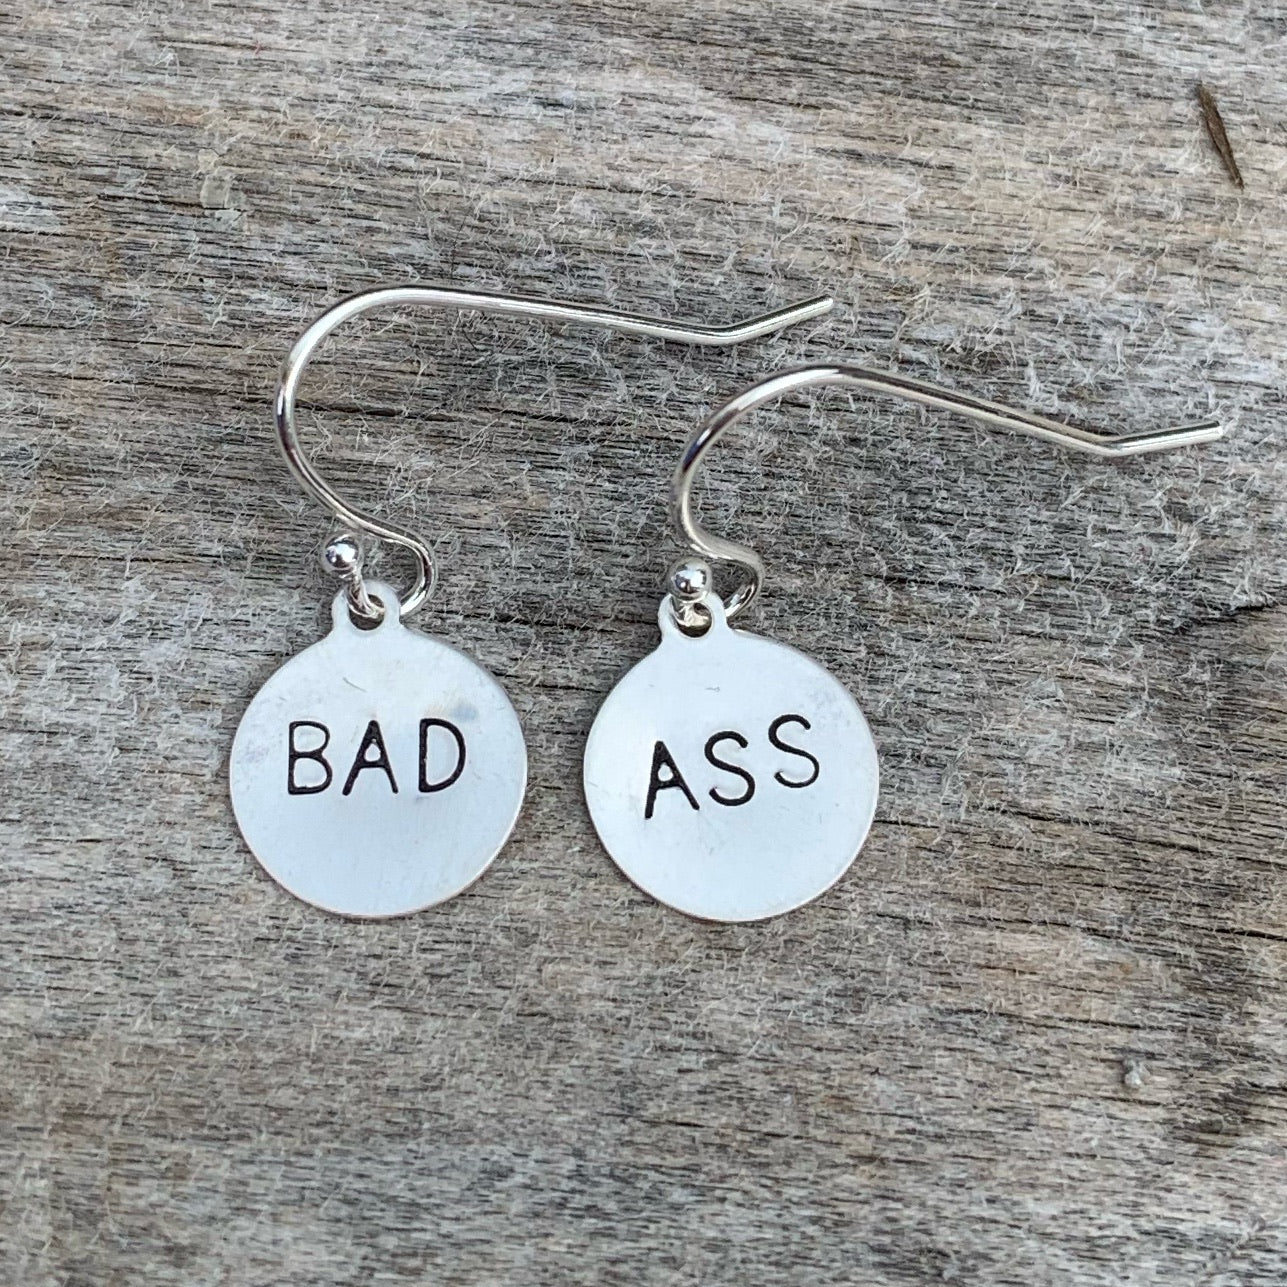 Pair of sterling silver earrings - circle shape - “bad ass”